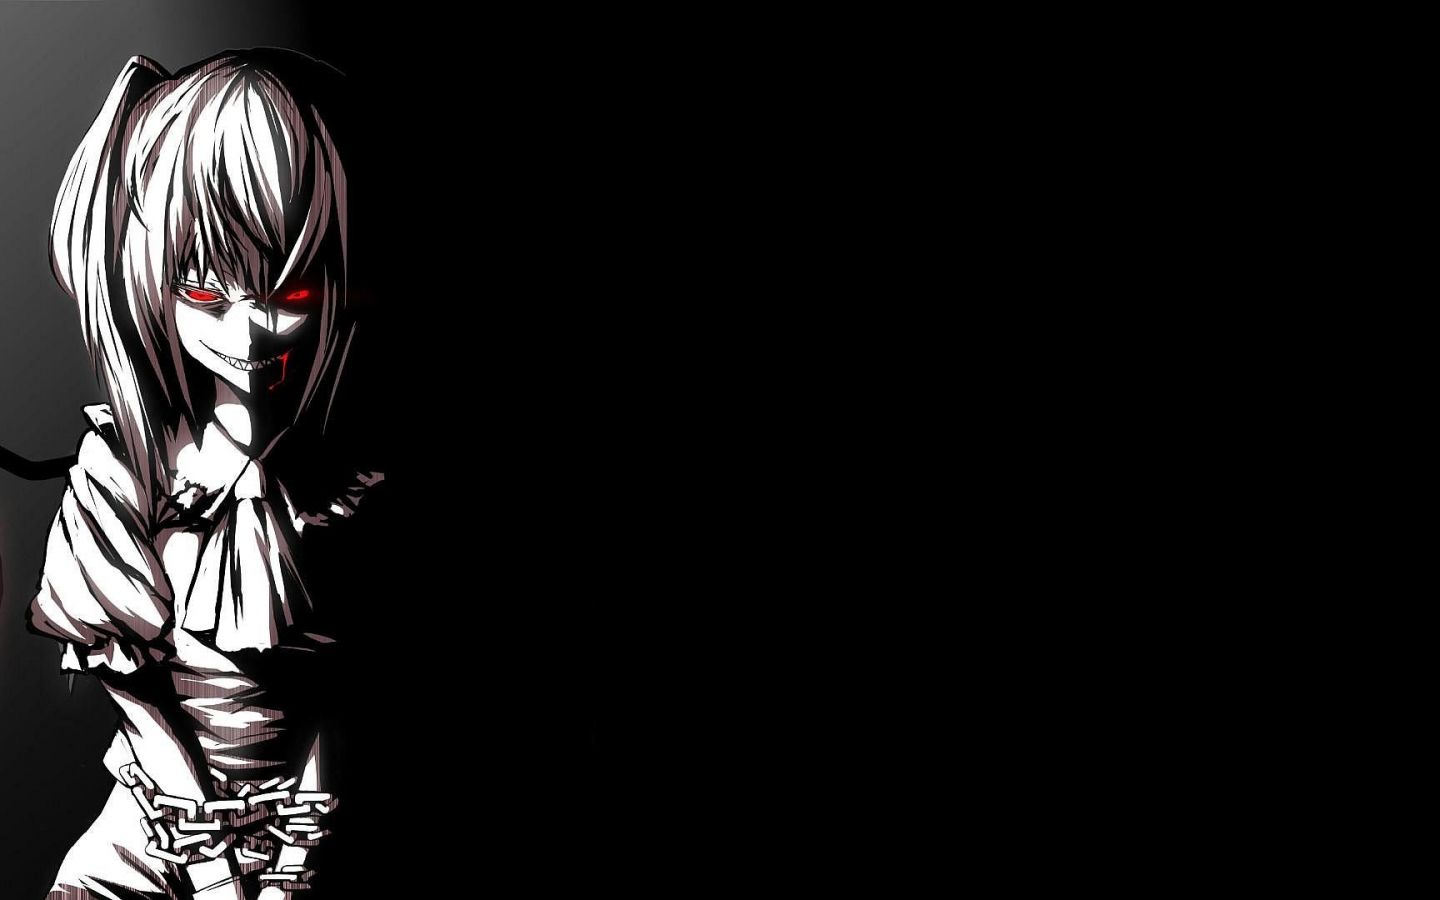 Free download Dark Anime Girl Wallpaper 9691 HD Wallpaper in Anime Imagecicom [1920x1080] for your Desktop, Mobile & Tablet. Explore Anime Wallpaper HD 1920x1080. Cool Anime Wallpaper, One Piece